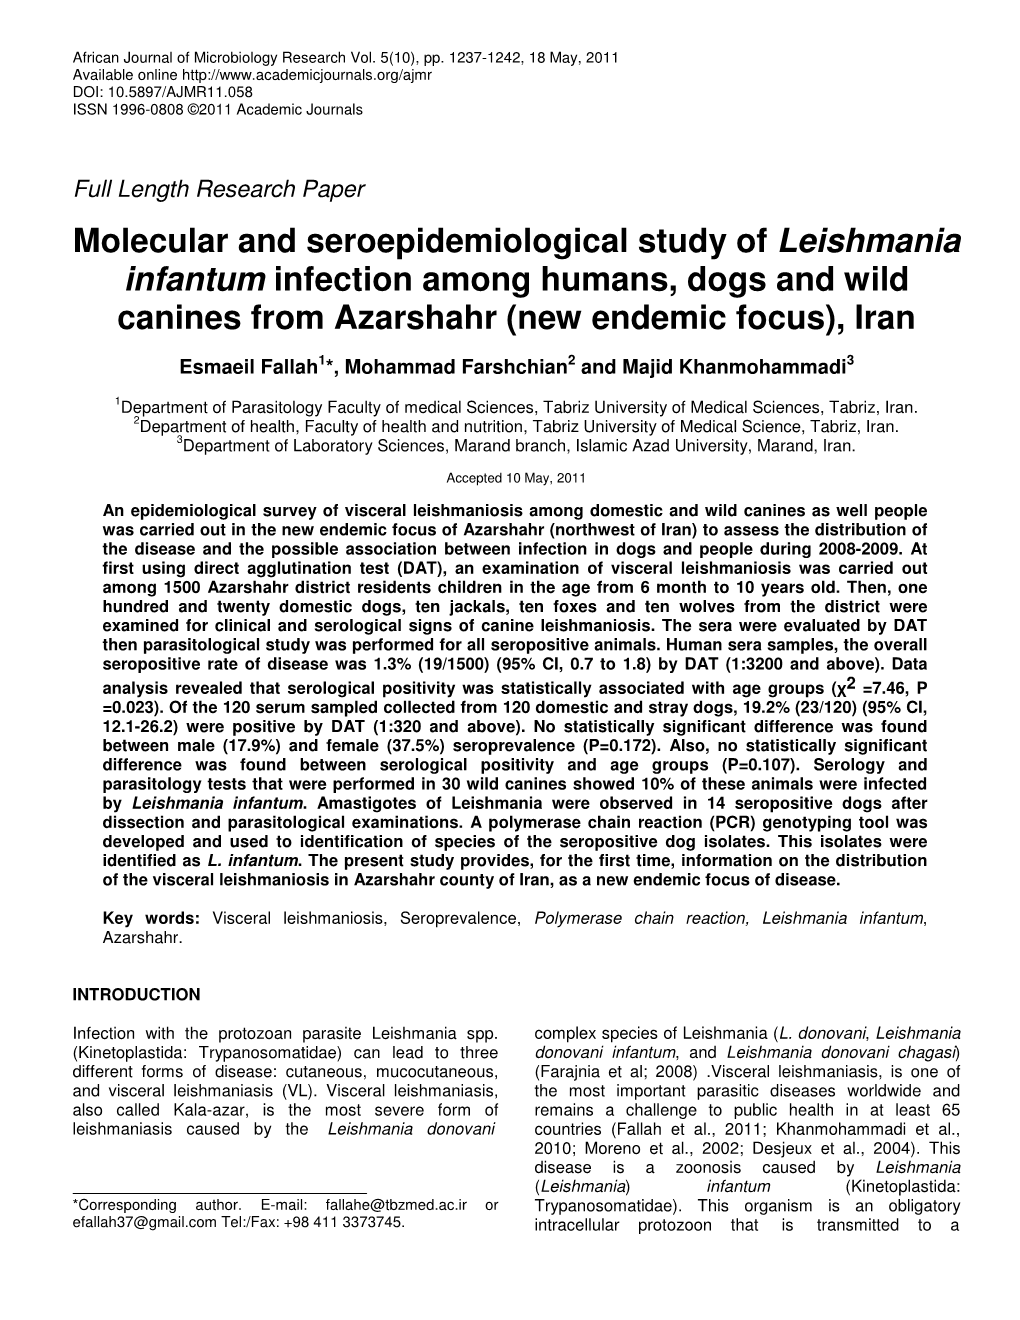 Molecular and Seroepidemiological Study of Leishmania Infantum Infection Among Humans, Dogs and Wild Canines from Azarshahr (New Endemic Focus), Iran